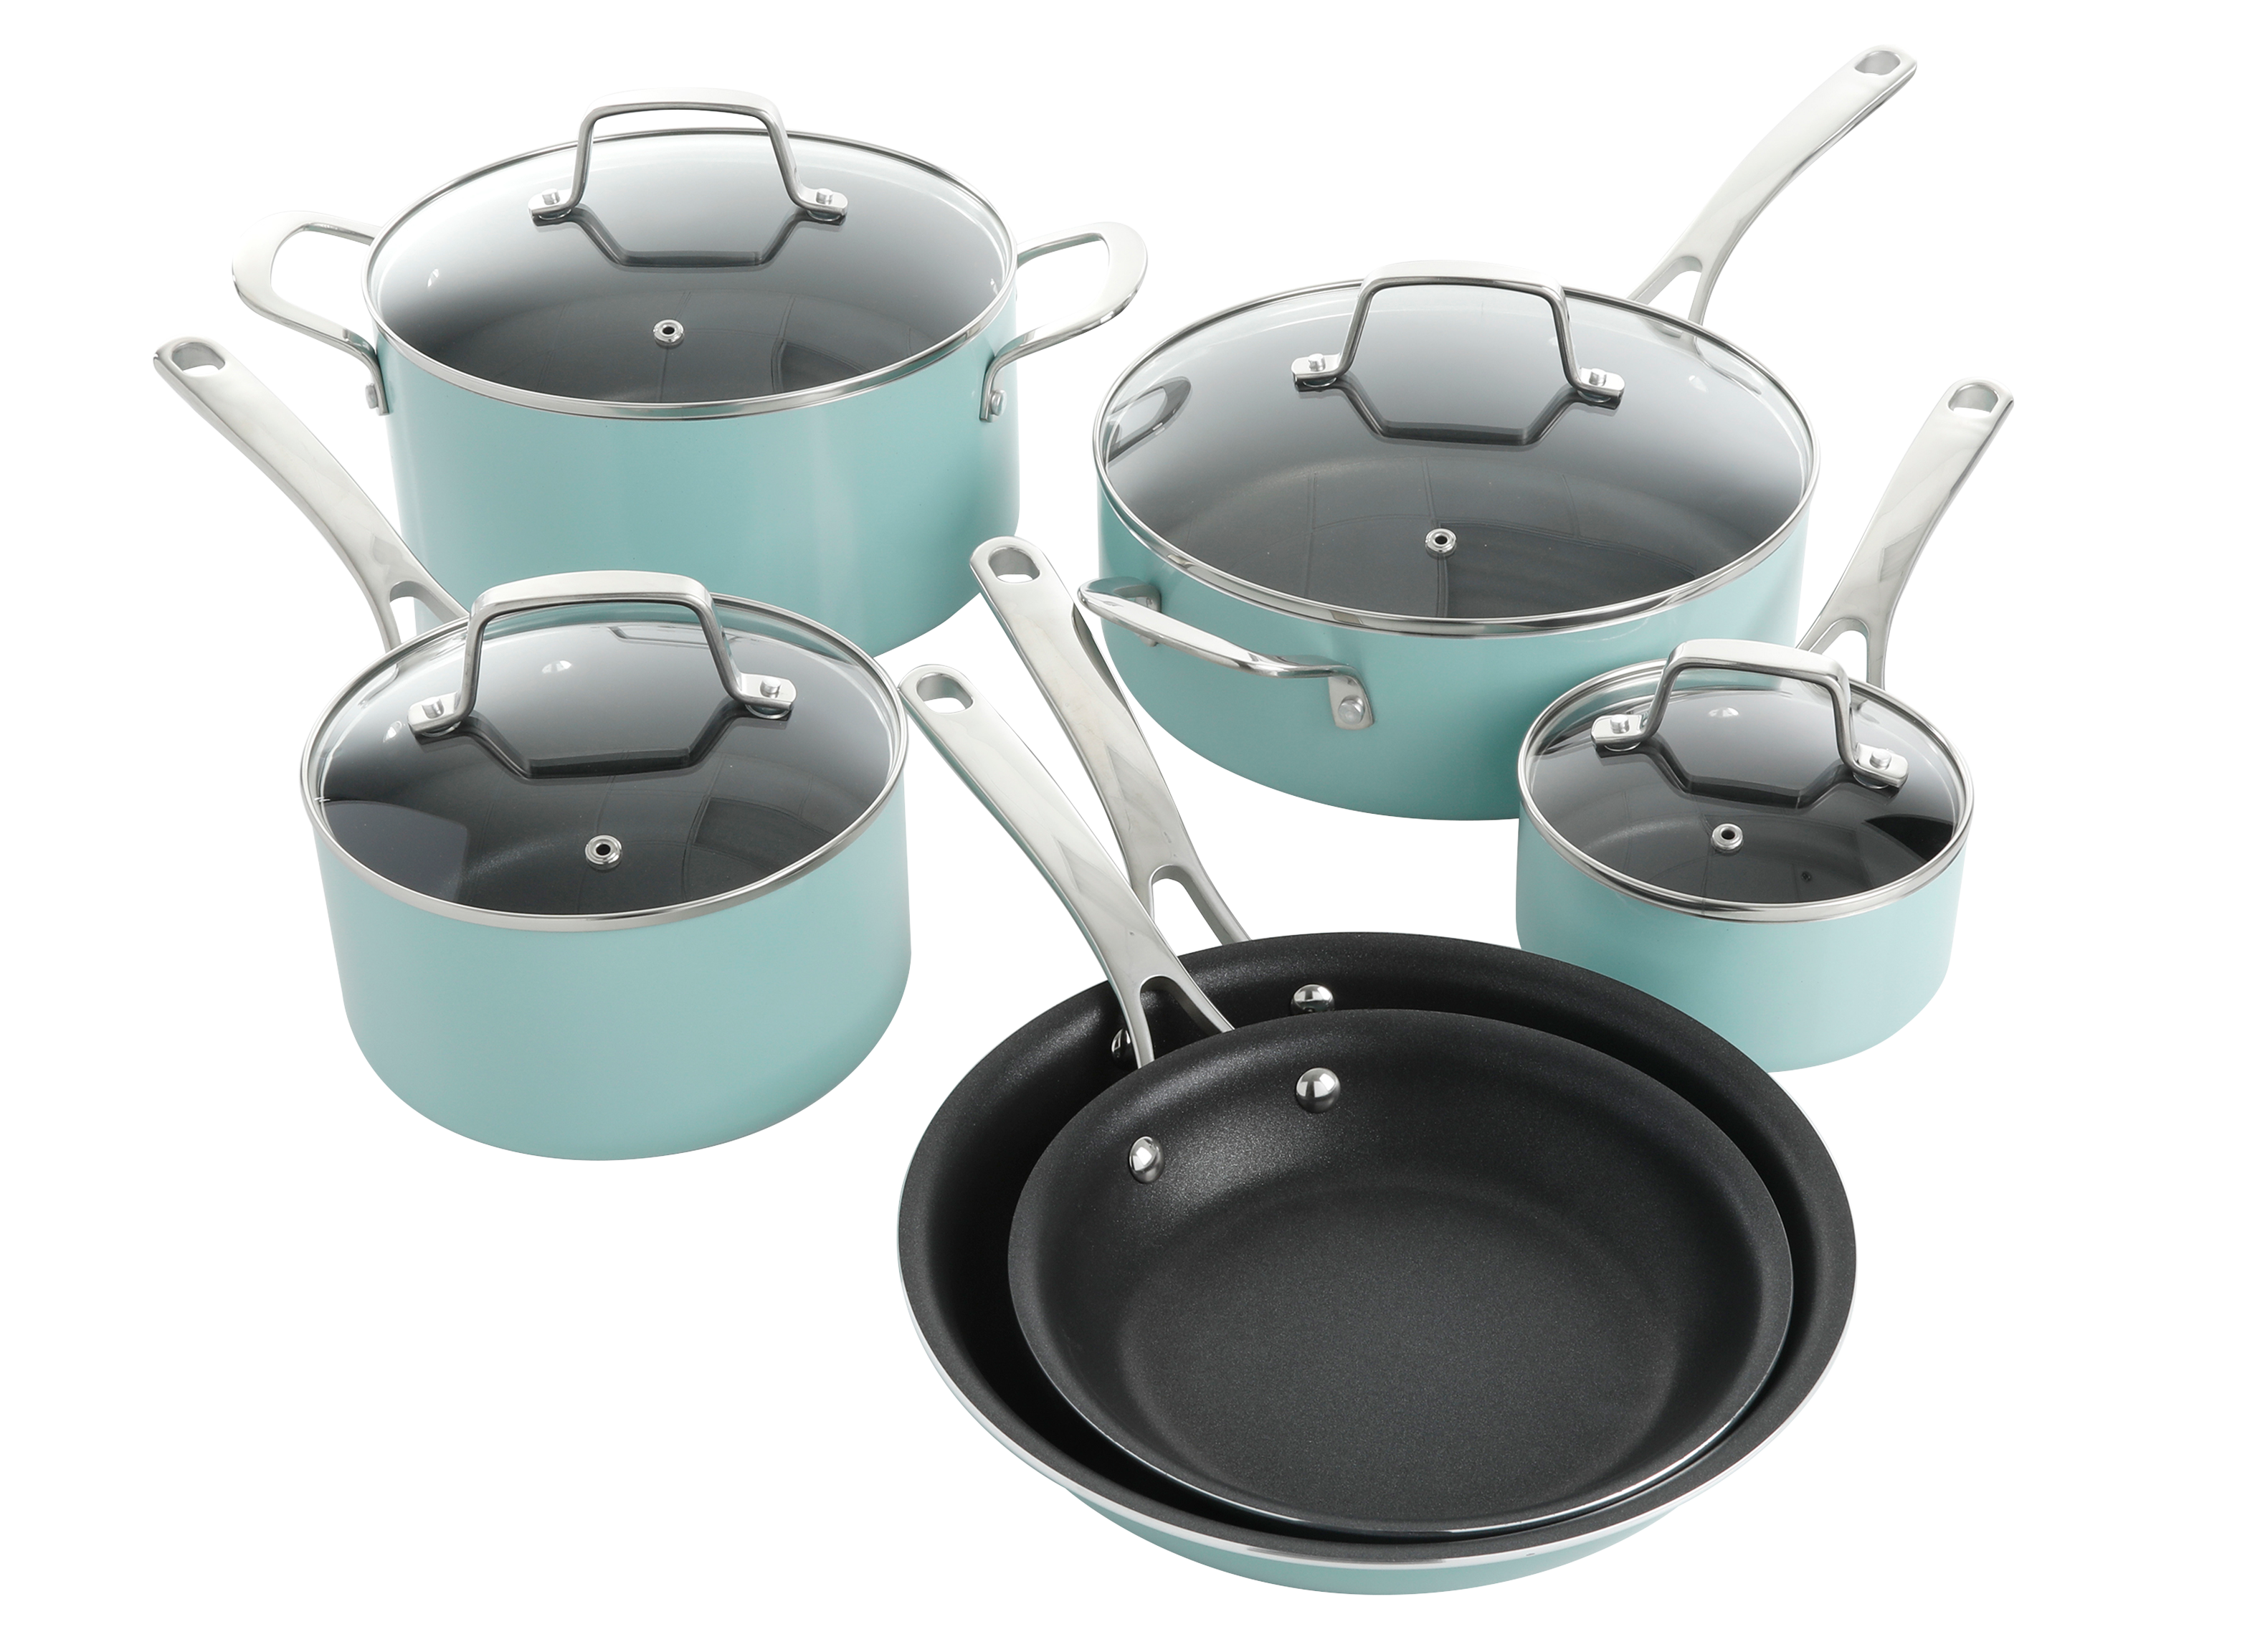 https://crdms.images.consumerreports.org/prod/products/cr/models/402086-cookware-sets-nonstick-martha-stewart-collection-hard-enameled-10015704.png